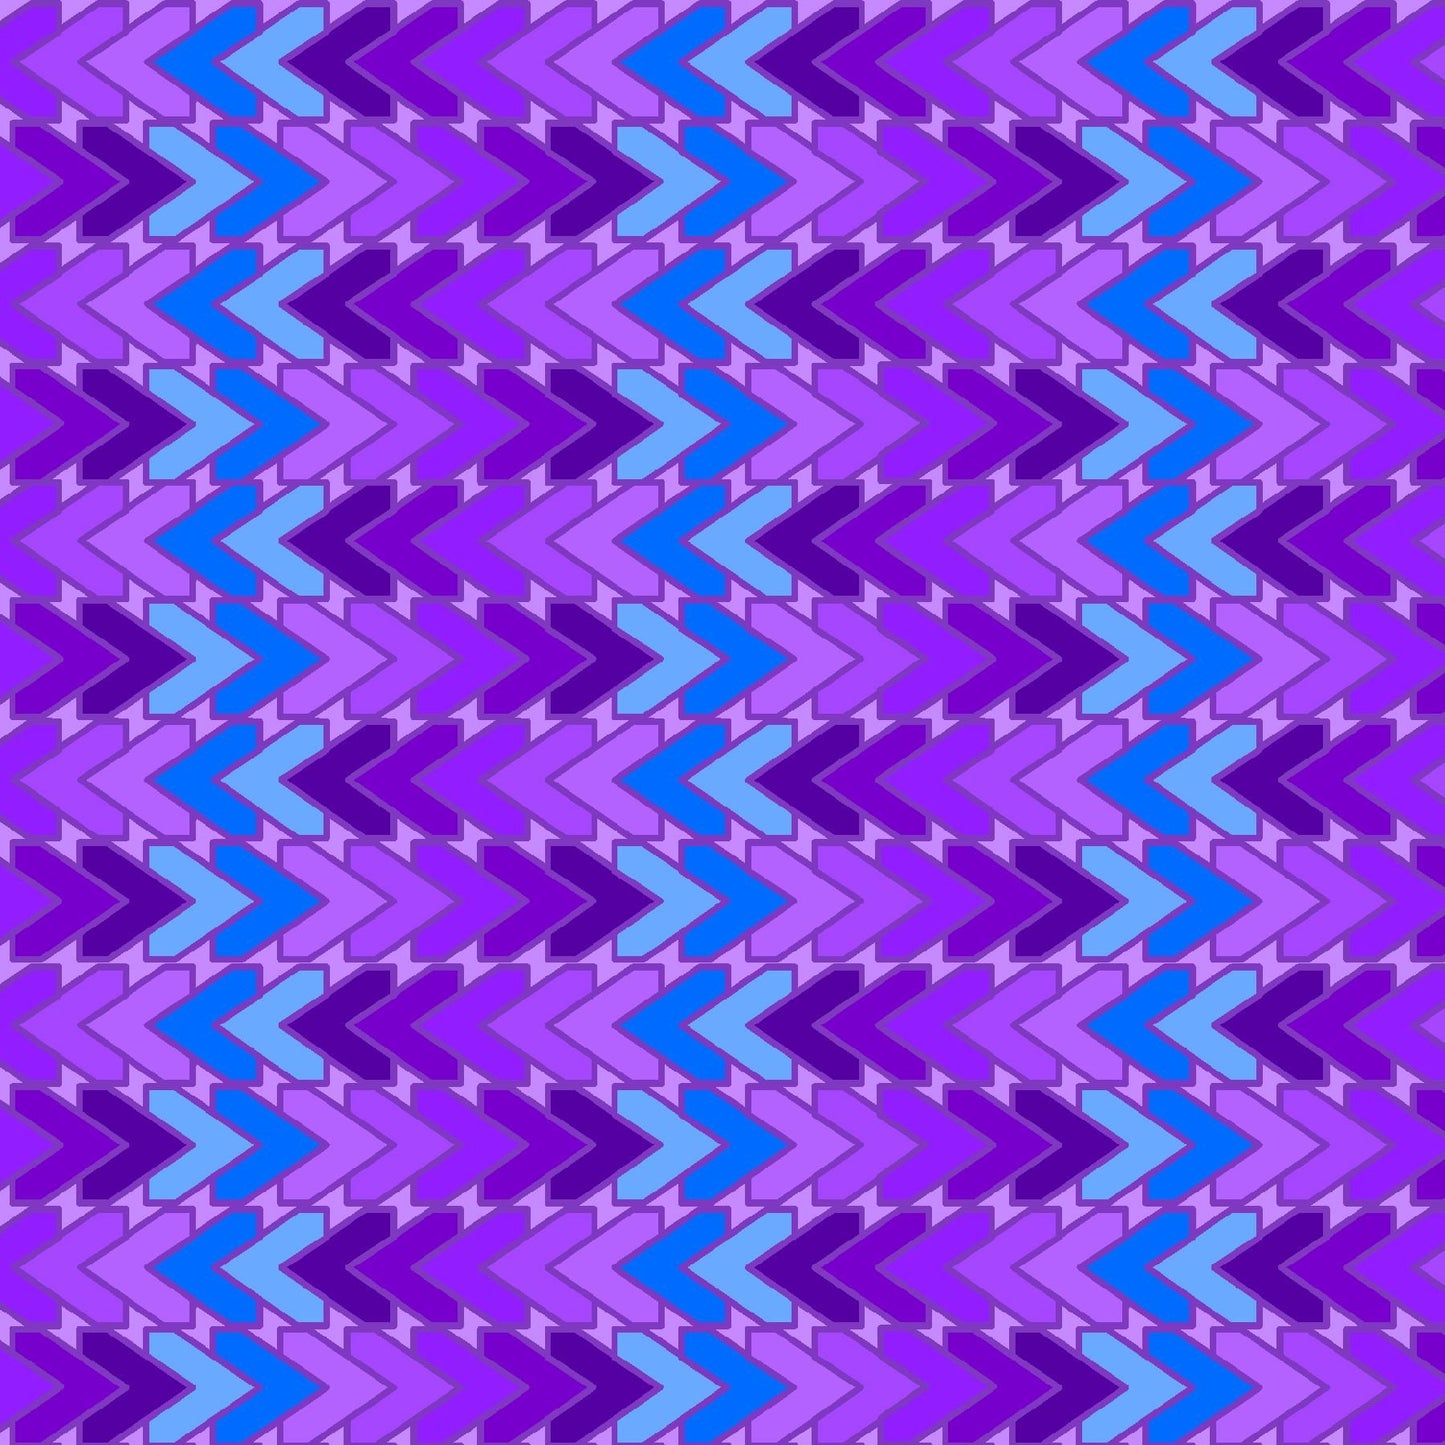 All Lined Up by Judy Gauthier Blue/Purple Chevron 5381-78  Digitally Printed Cotton Woven Fabric